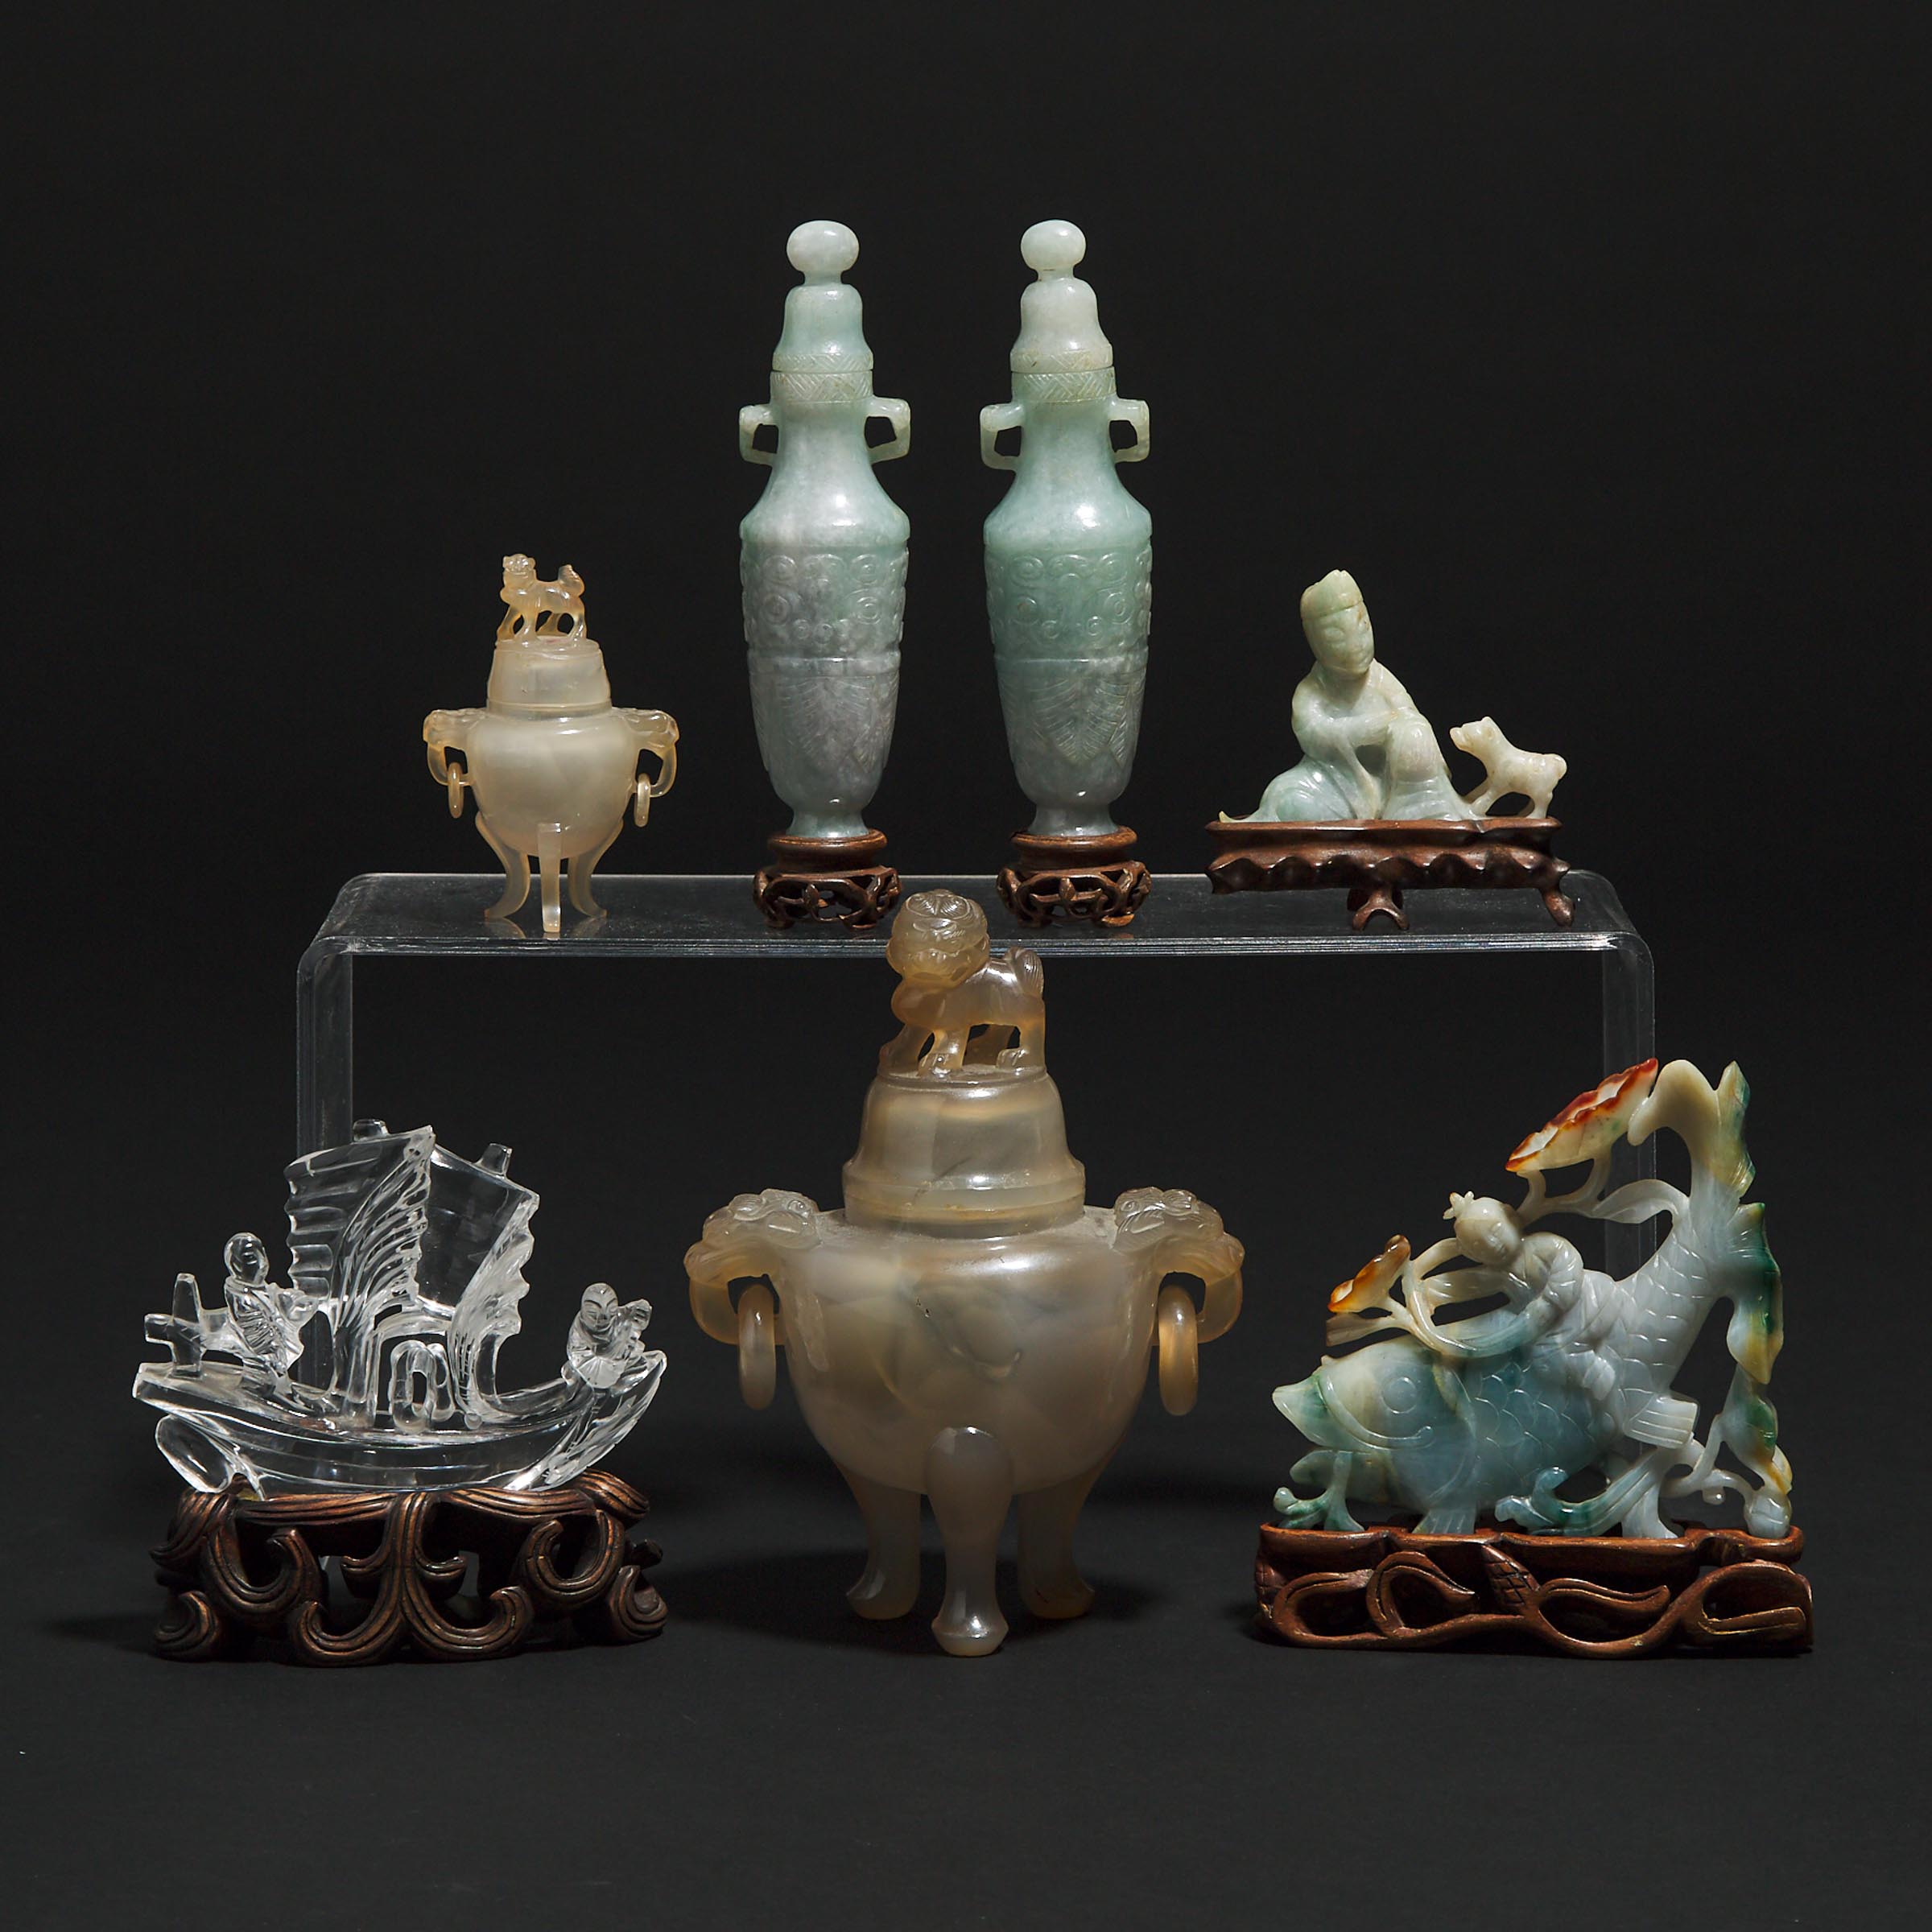 A Group of Four Jadeite Carvings, Together With Two Small Agate Censers and a Rock Crystal Carved Boat, Late Qing/Republican Period